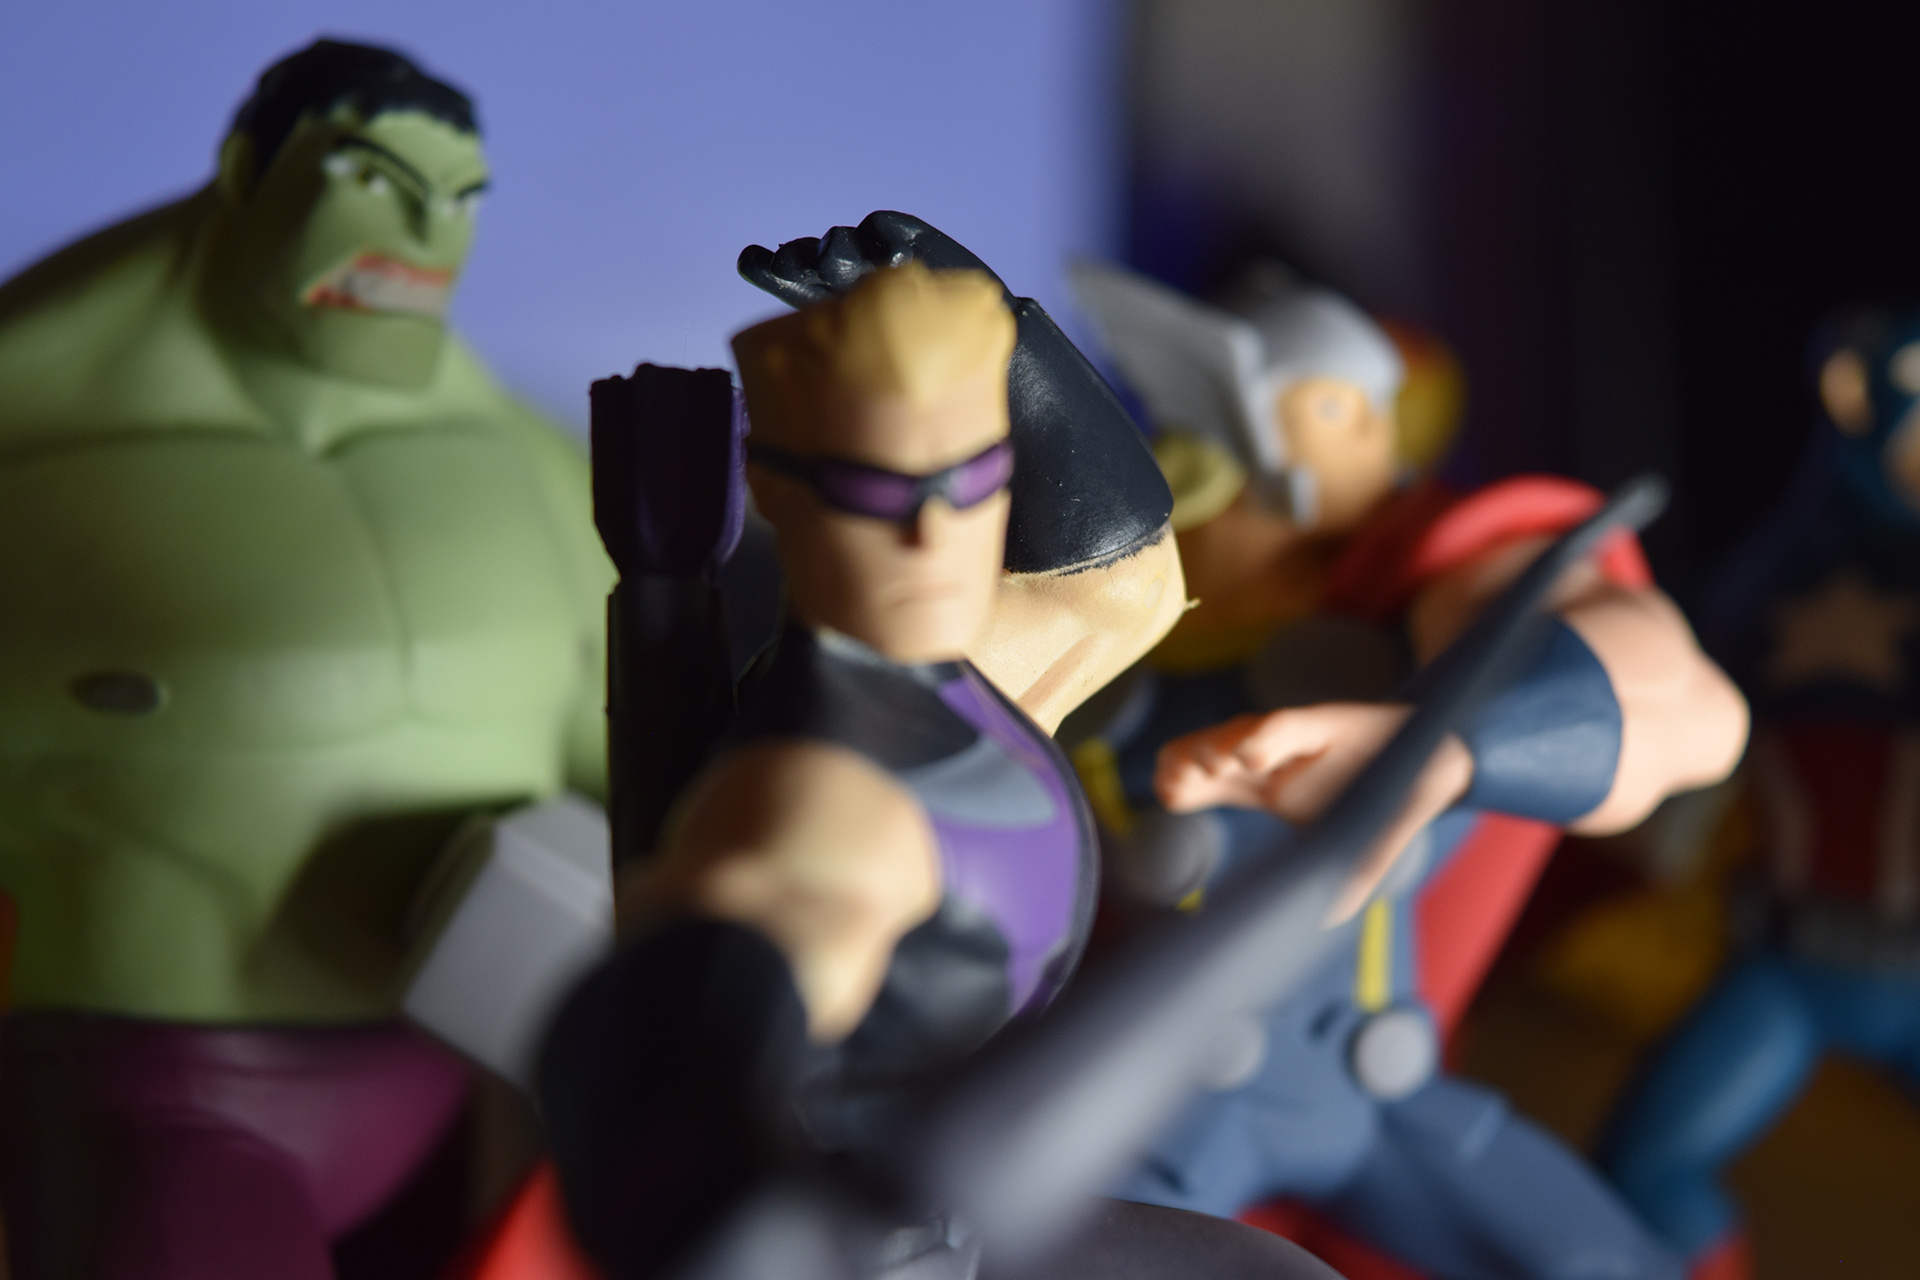 Disney Infinity’s Marvel Toys Are Looking A Bit Rough